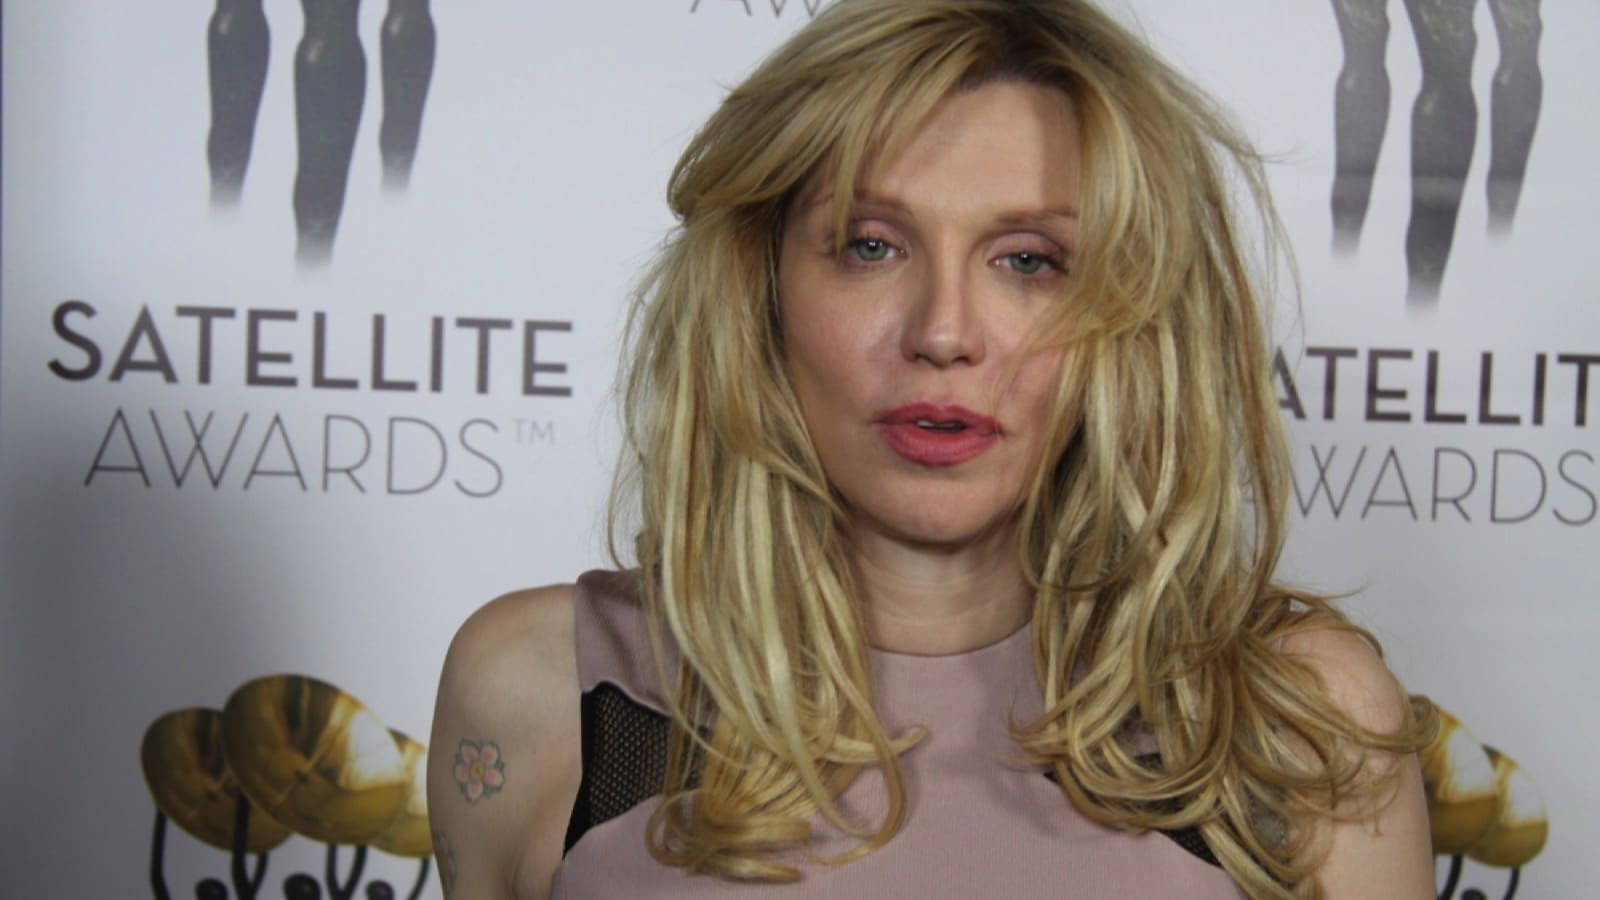 FEBRUARY 23, 2014: Courtney Love arriving at Satellite Awards on February 23, 2014 in Century City, Los Angeles, Ca.